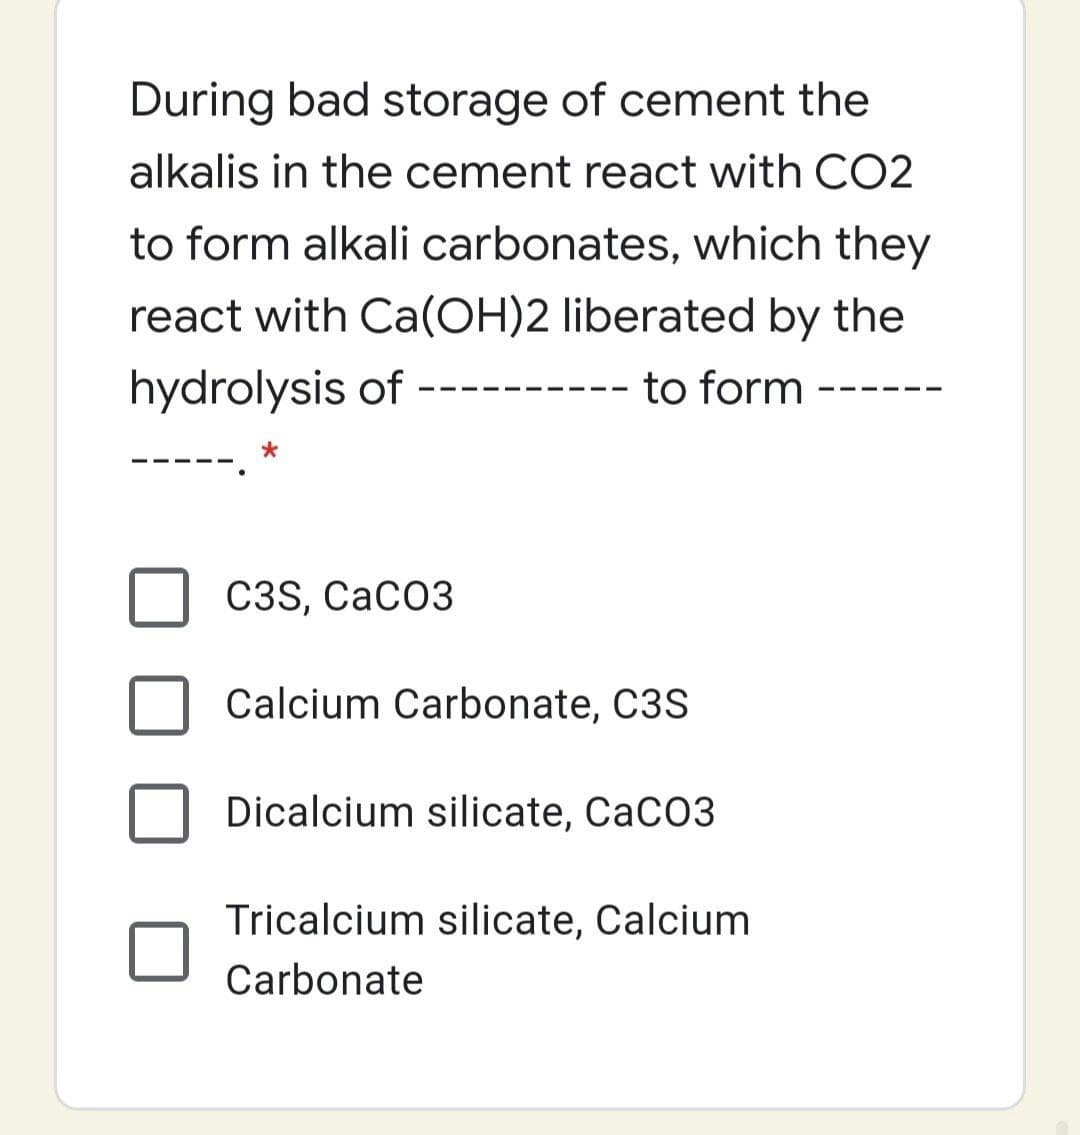 During bad storage of cement the
alkalis in the cement react with CO2
to form alkali carbonates, which they
react with Ca(OH)2 liberated by the
hydrolysis of
to form
C3S, CaCO3
Calcium Carbonate, C3S
Dicalcium silicate, CaCO3
Tricalcium silicate, Calcium
Carbonate
